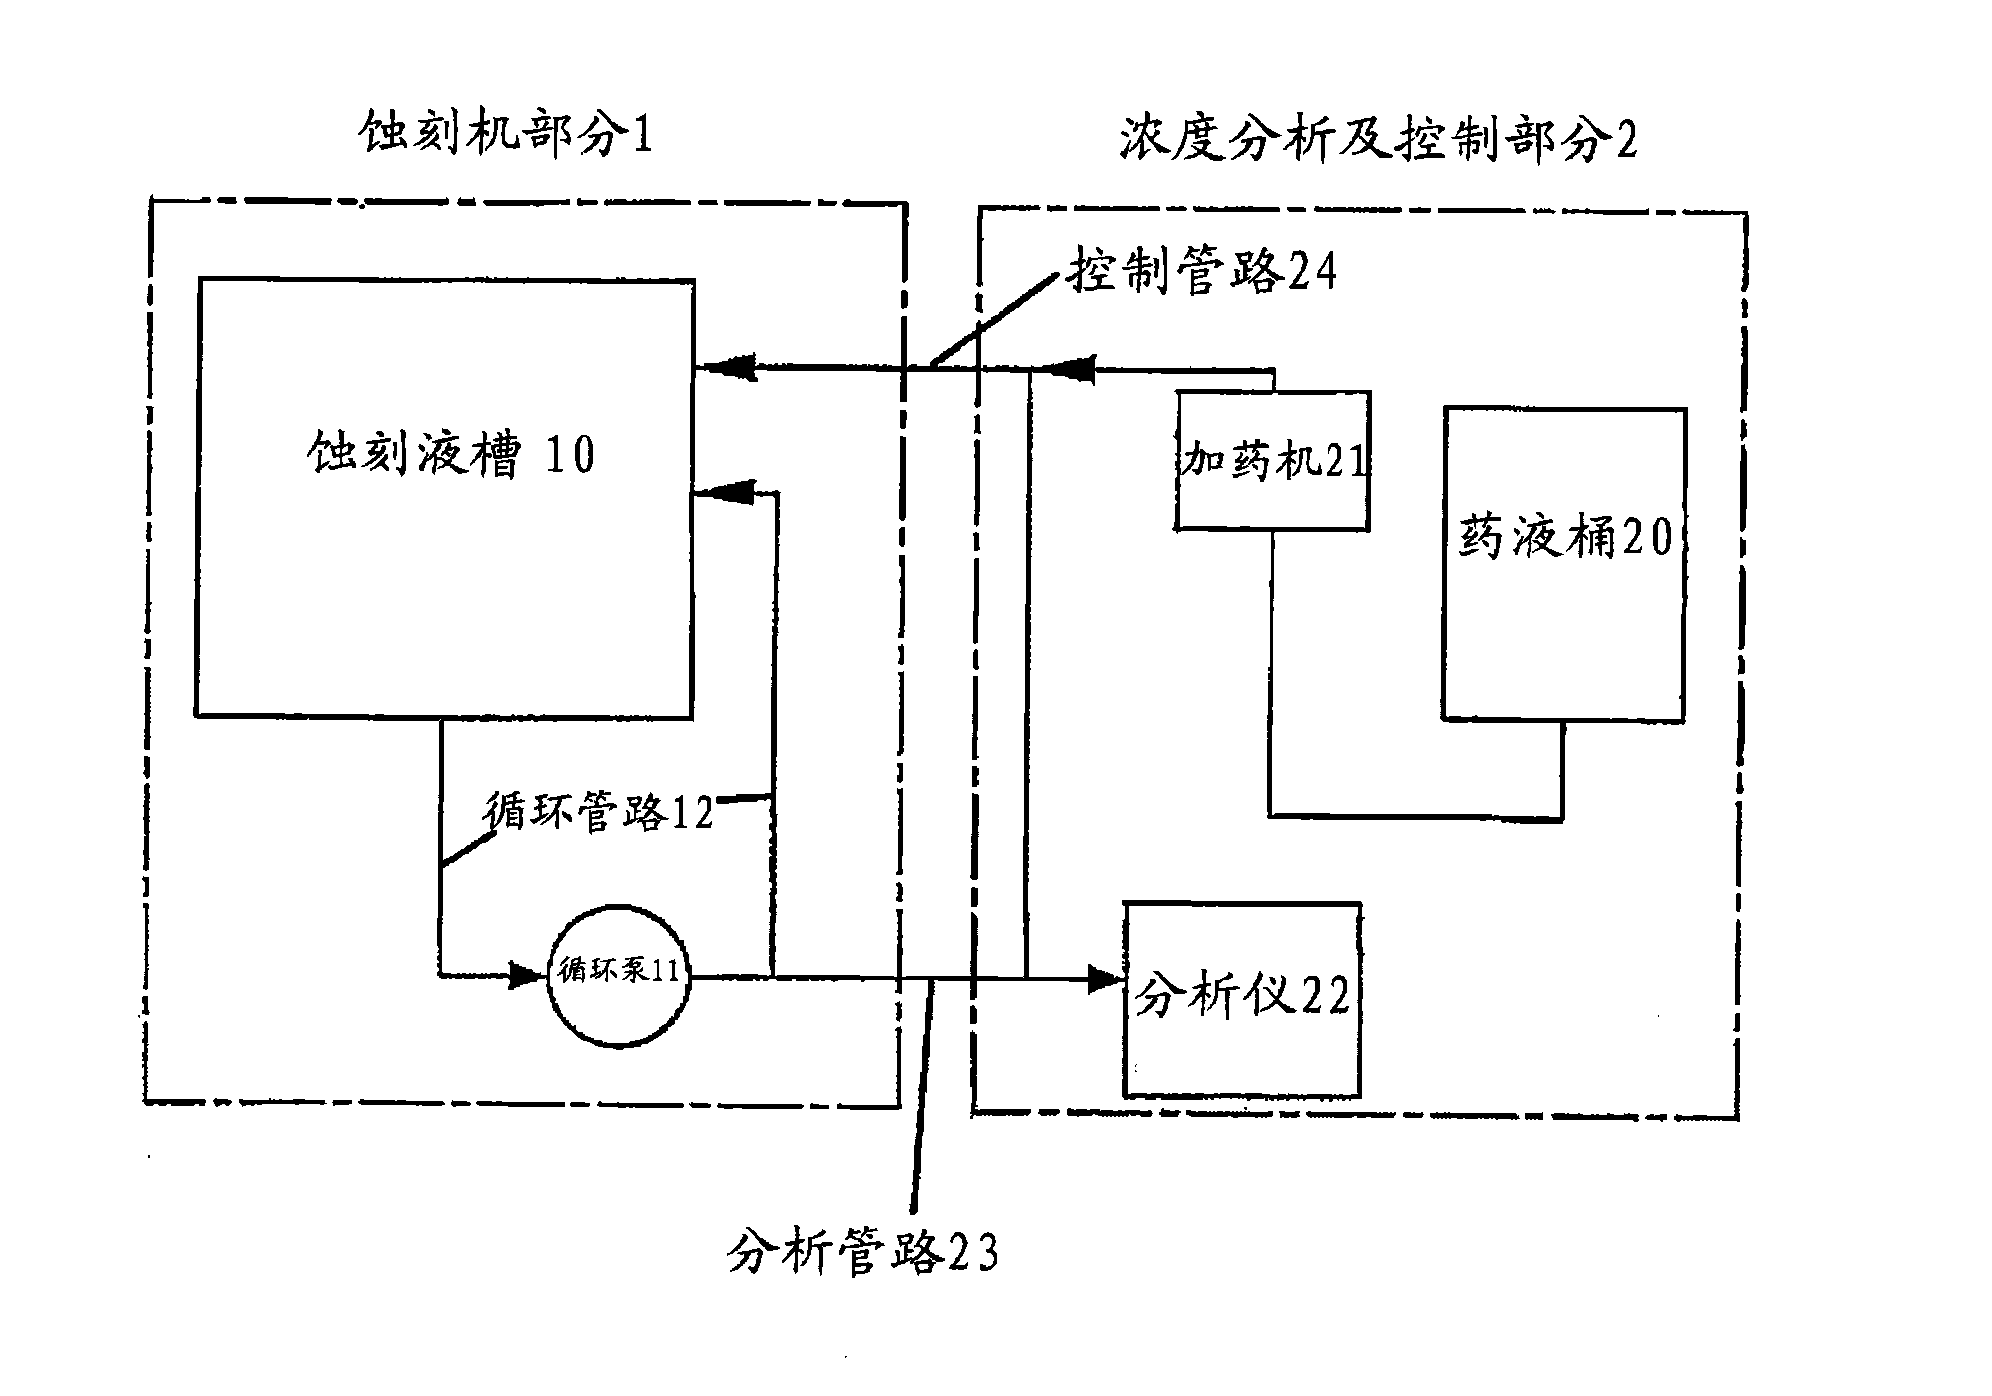 Method for controlling etching solution concentration